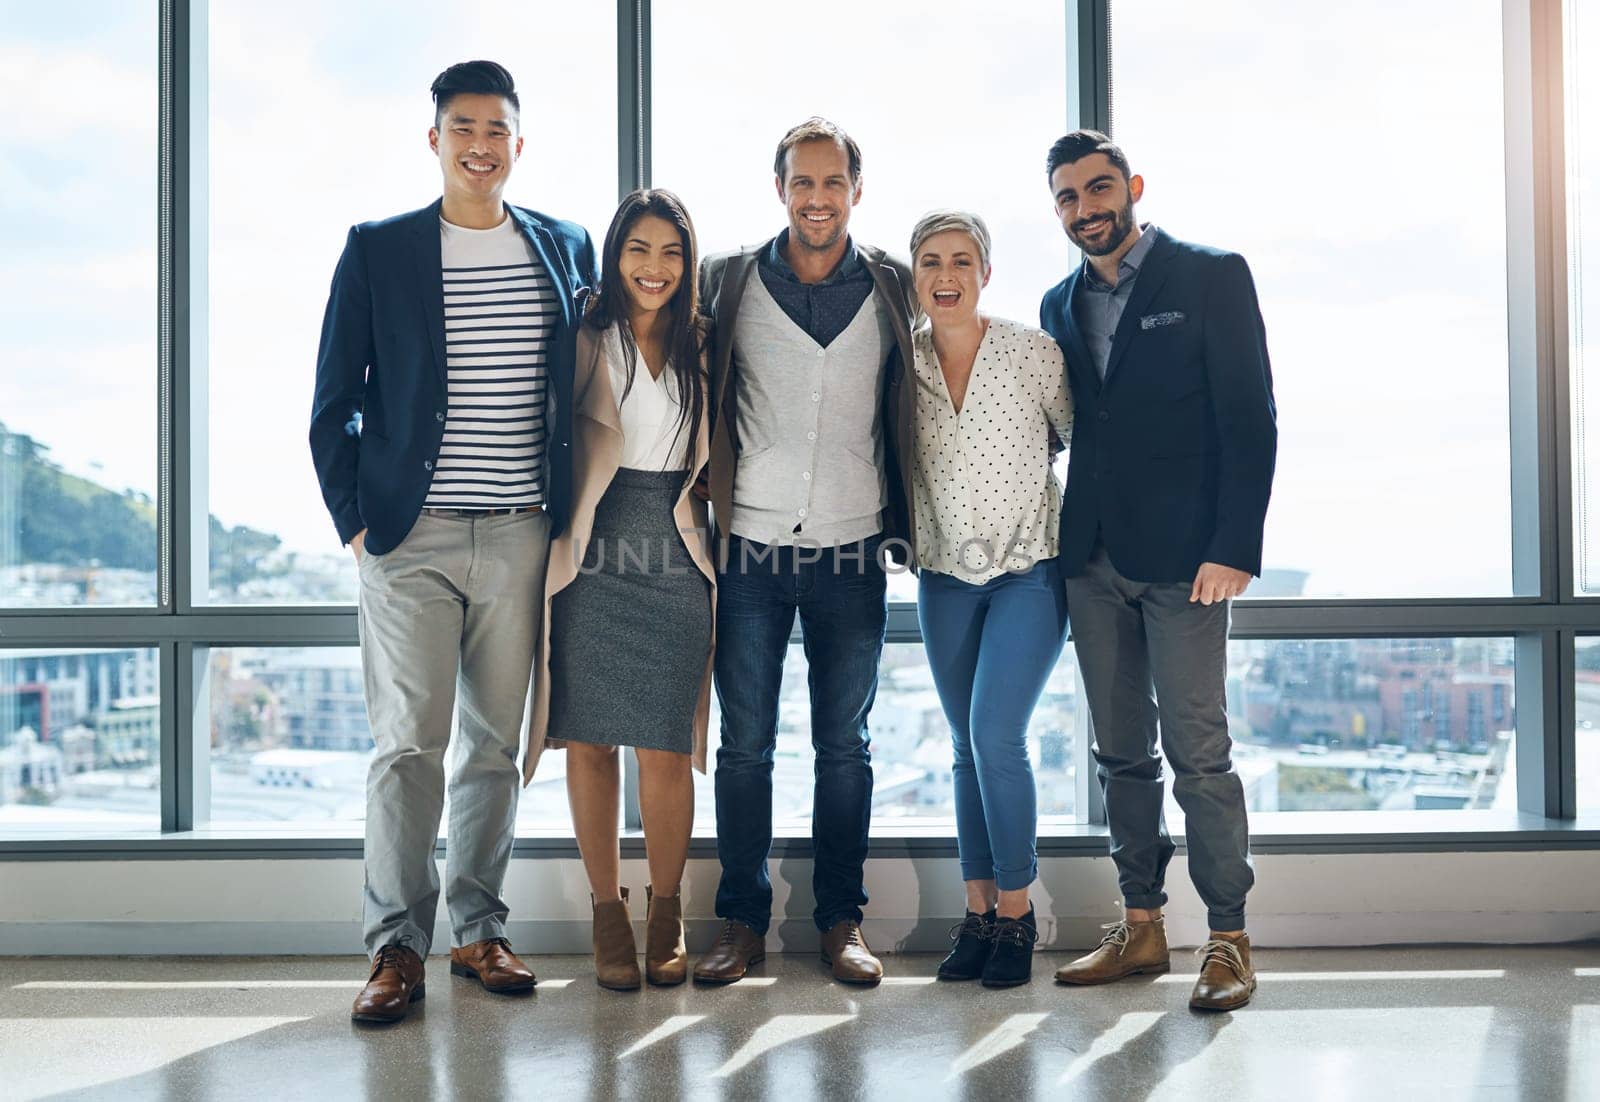 The team youll want to be part of. Portrait of a group of confident young businesspeople standing together in the office at work during the day